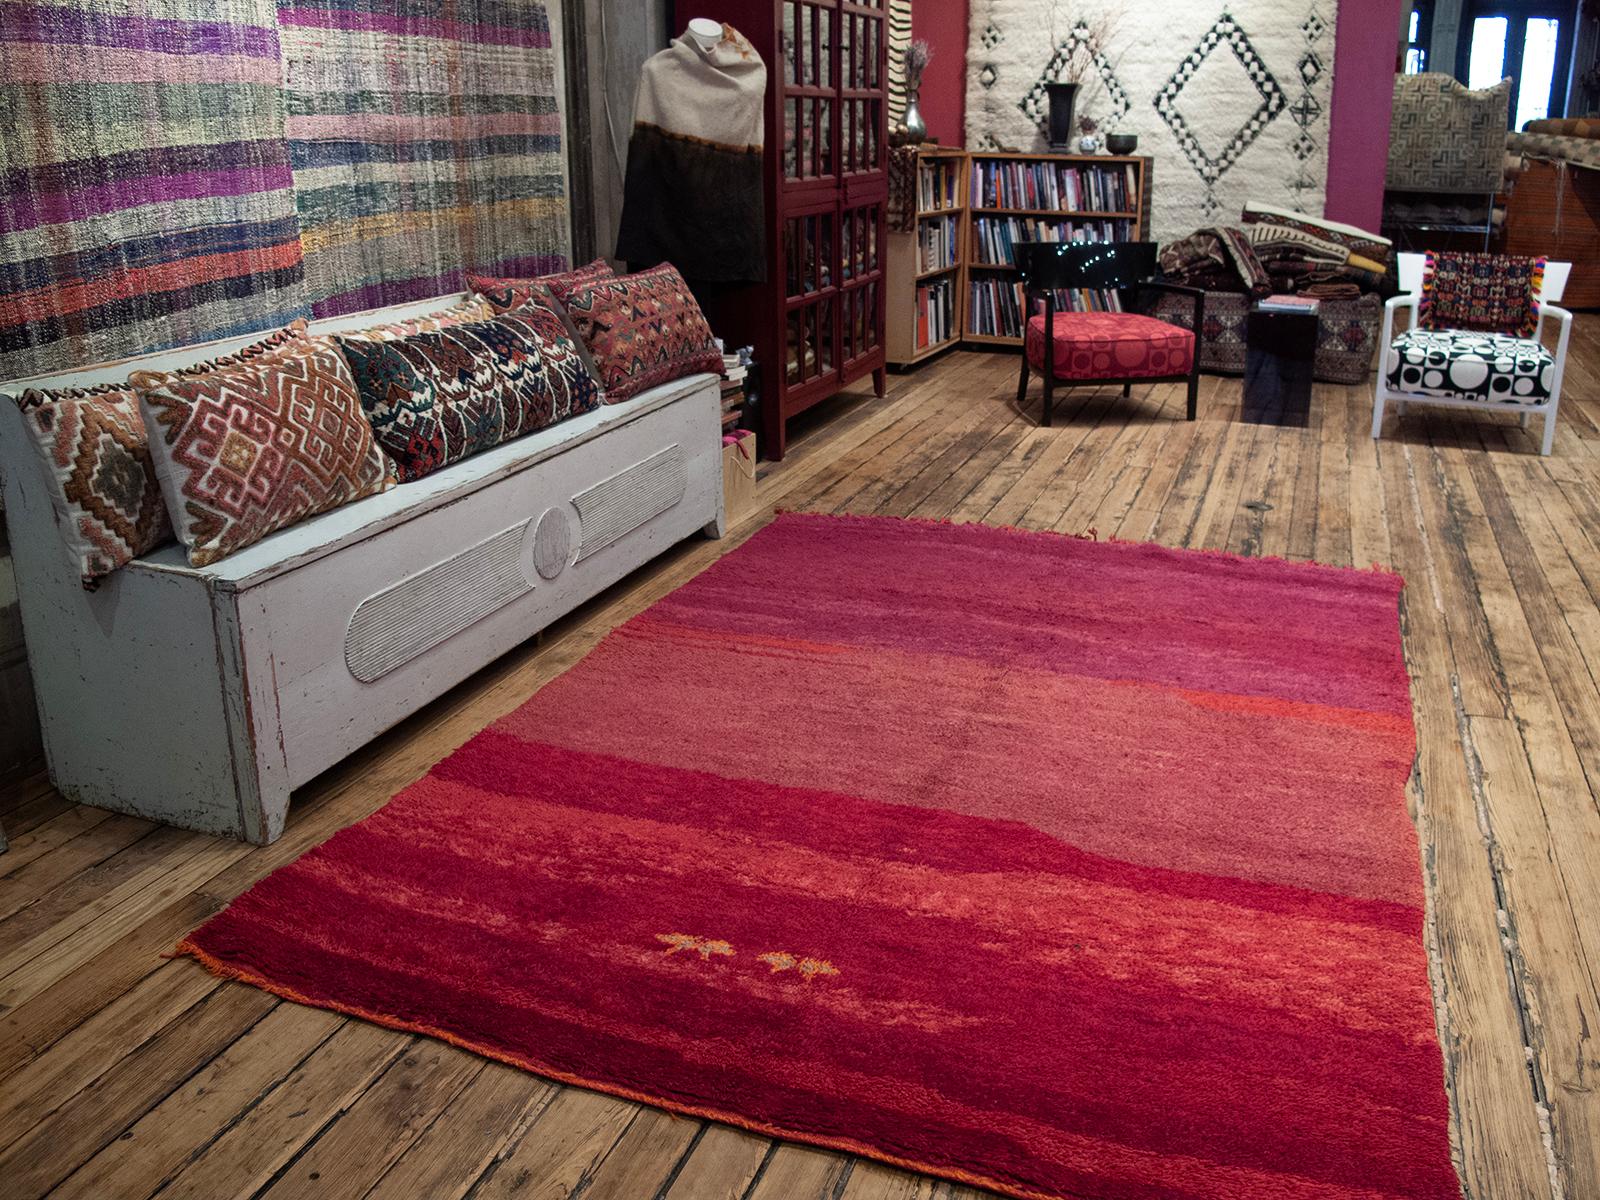 A great example showing how the accidental color shifts, called <i>“abrash”</i> in rug trade, can enhance a seemingly monochromatic rug. Note the two half-finished star or flower motifs at the bottom - the weaver must have had a change of